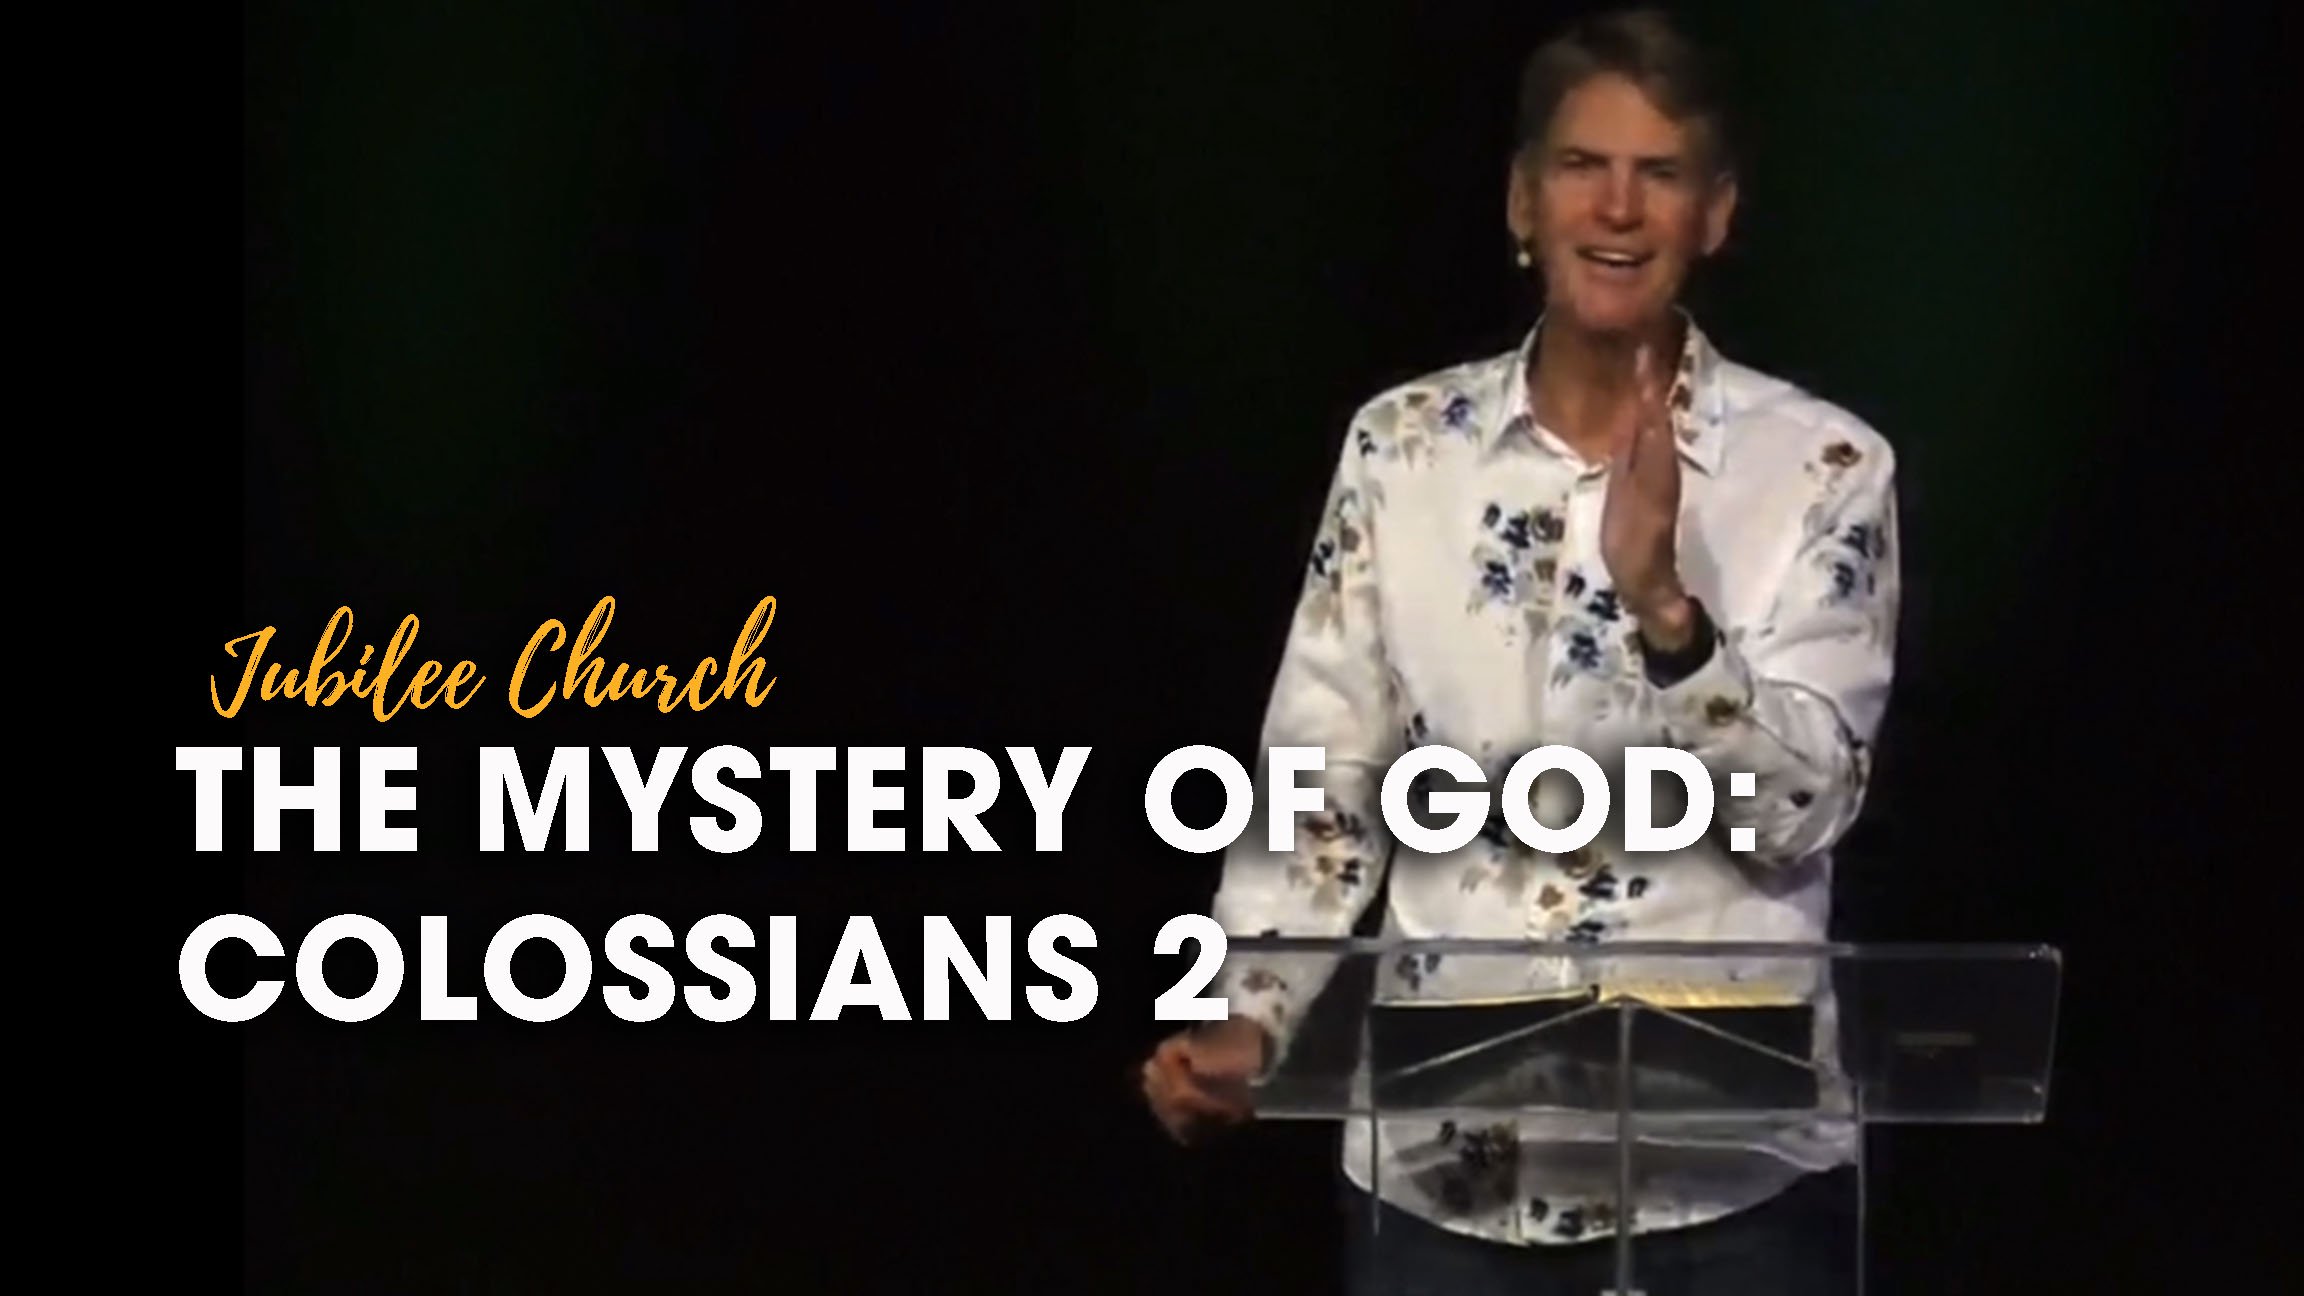 The Mystery of God: Colossians 2